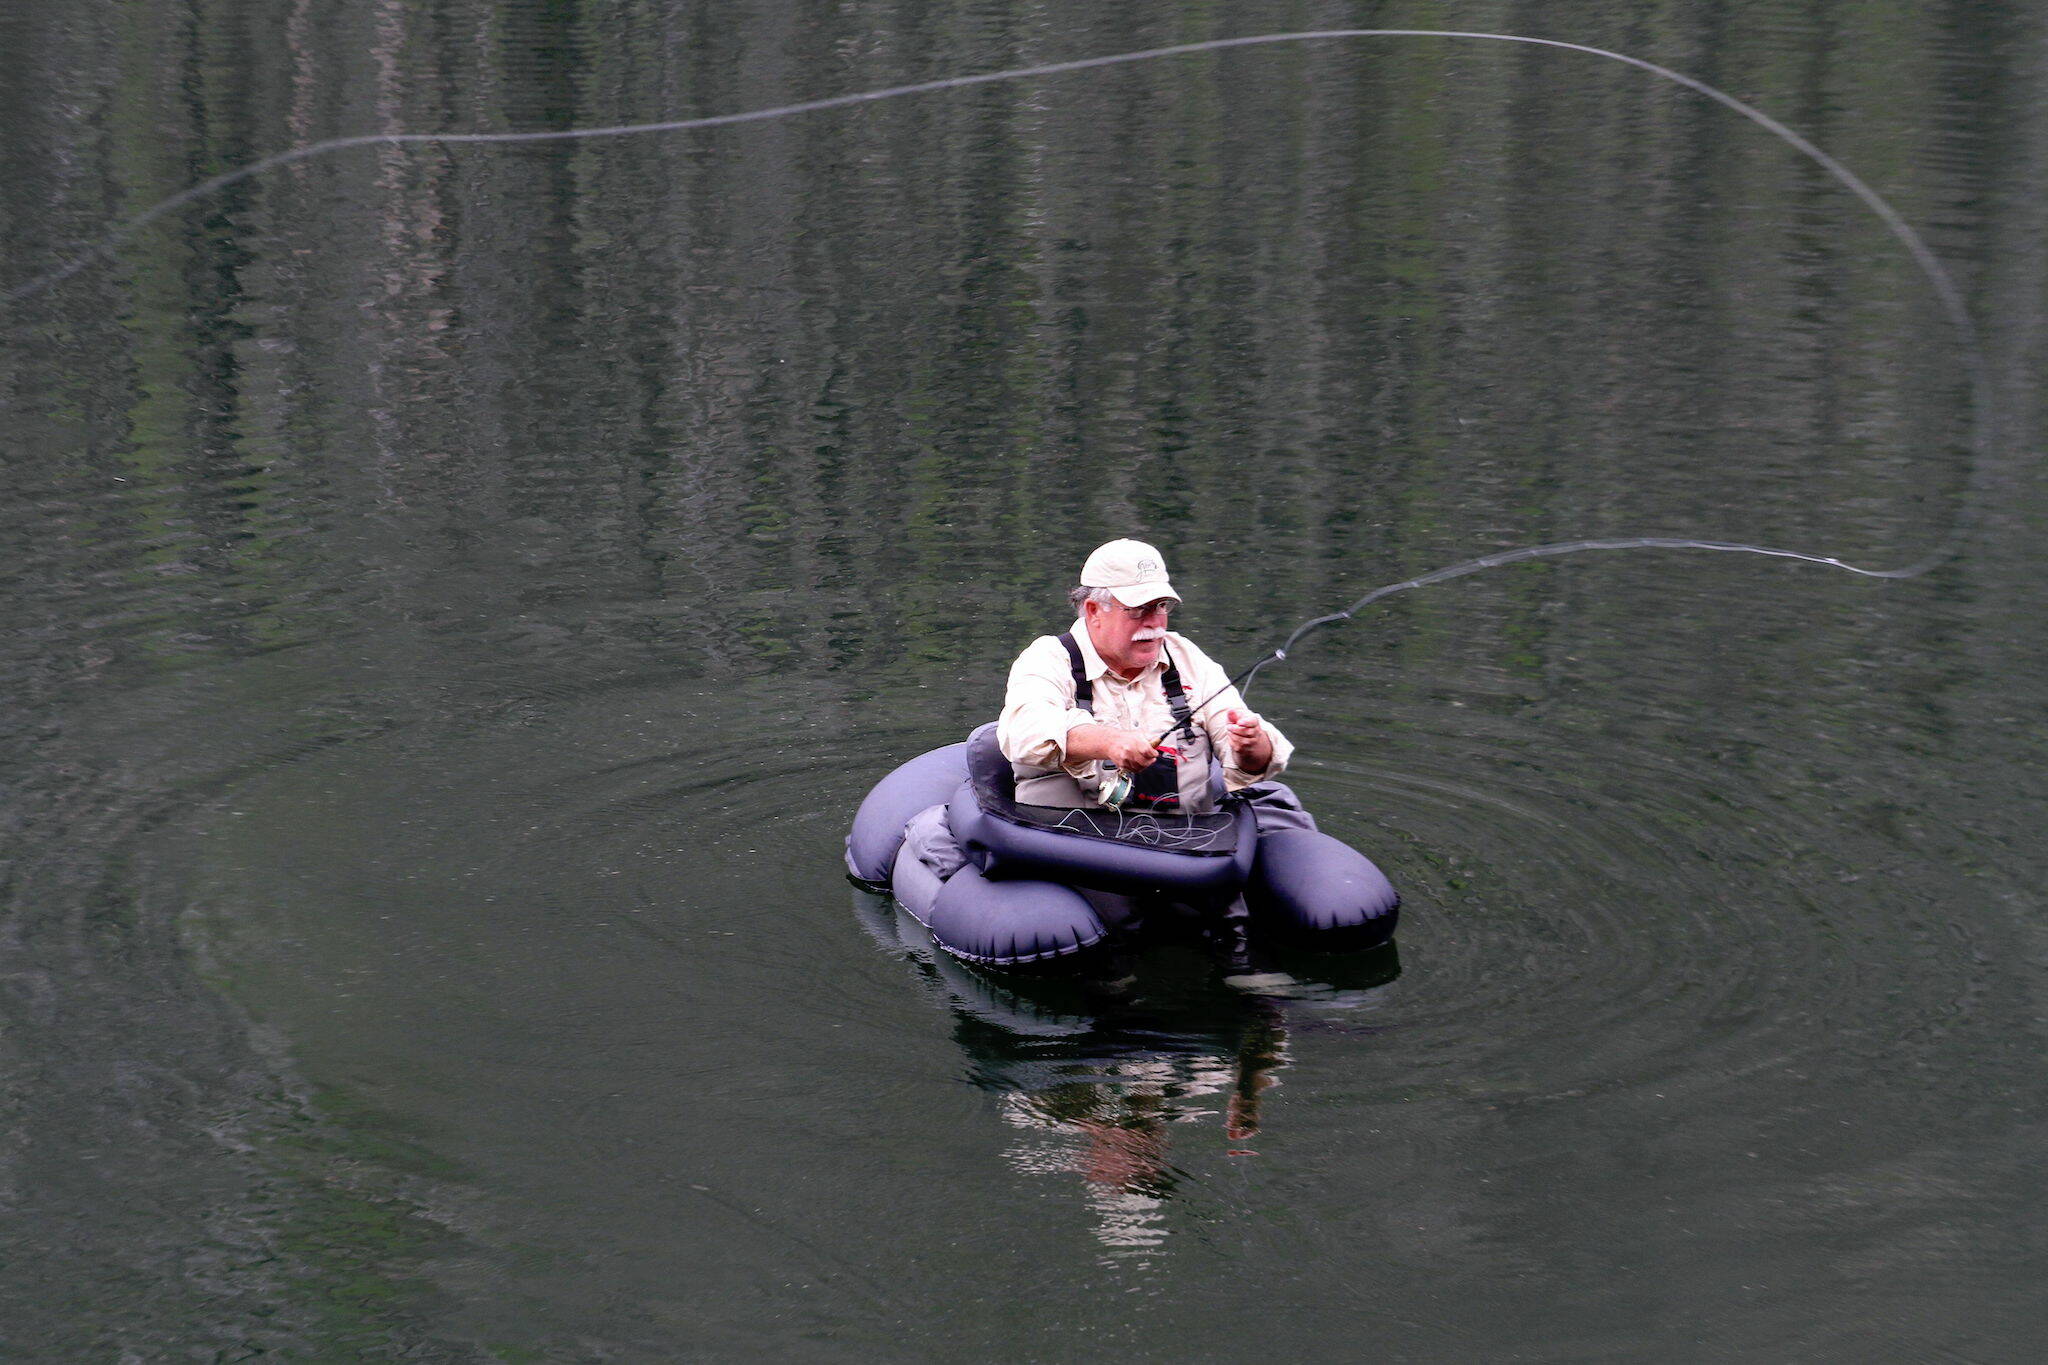 Mike Benbow, of Tulalip, uses a float tube to search for trout in Black Lake north of Winthrop in the Pasayten Wilderness at about 4,000 ft on July 20, 2012. Float tubes allow access to more water on the high mountain lakes. (Jim Haley / The Herald file)